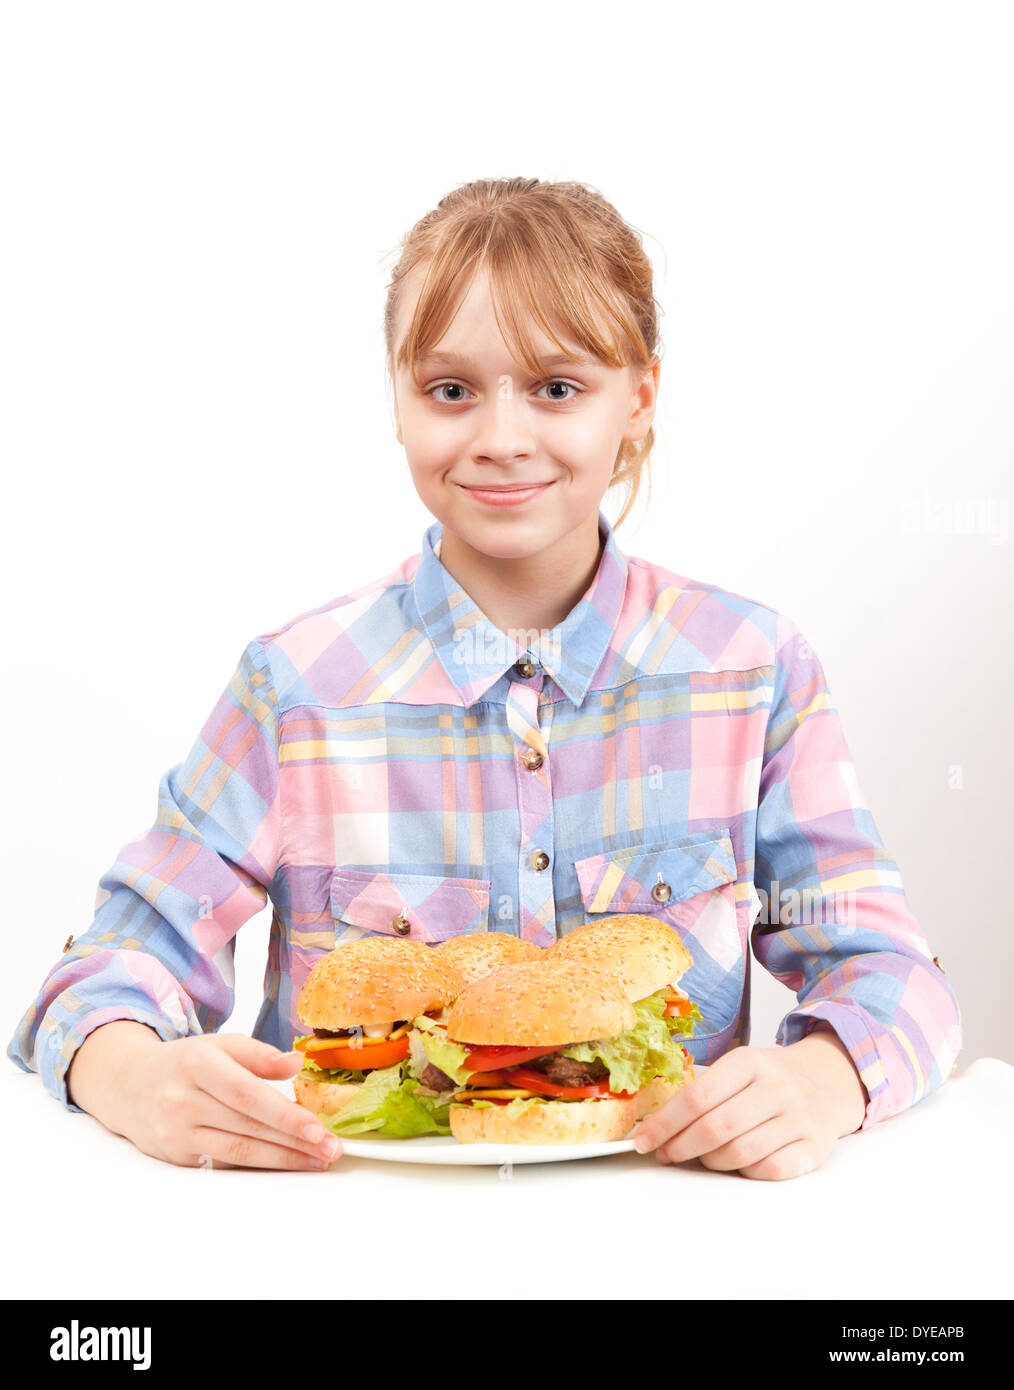 Little smiling blond girl with big homemade hamburgers on white plate Stock Photo